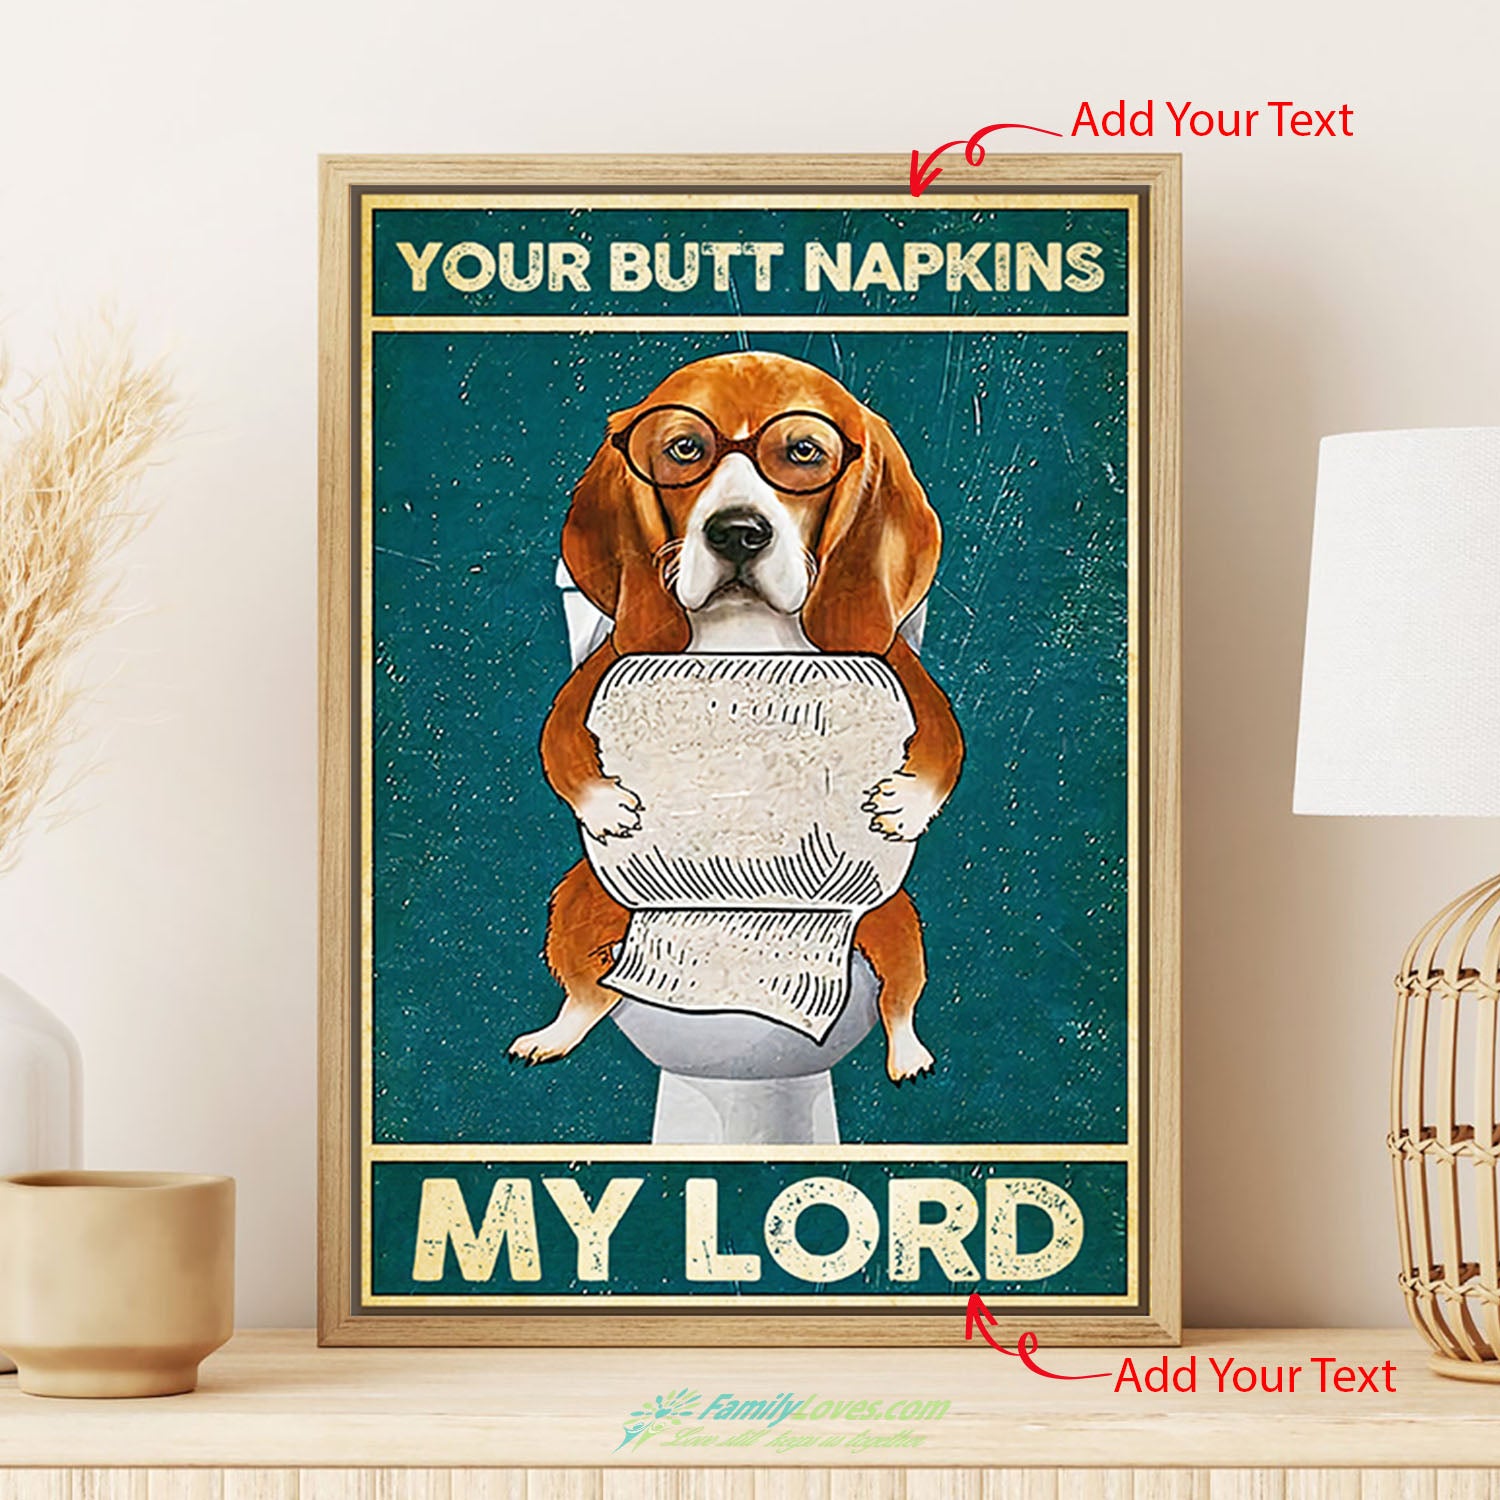 Dragon Your Butt Napkins My Lord Dog Canvas 20X30 Poster Frames All Size 1